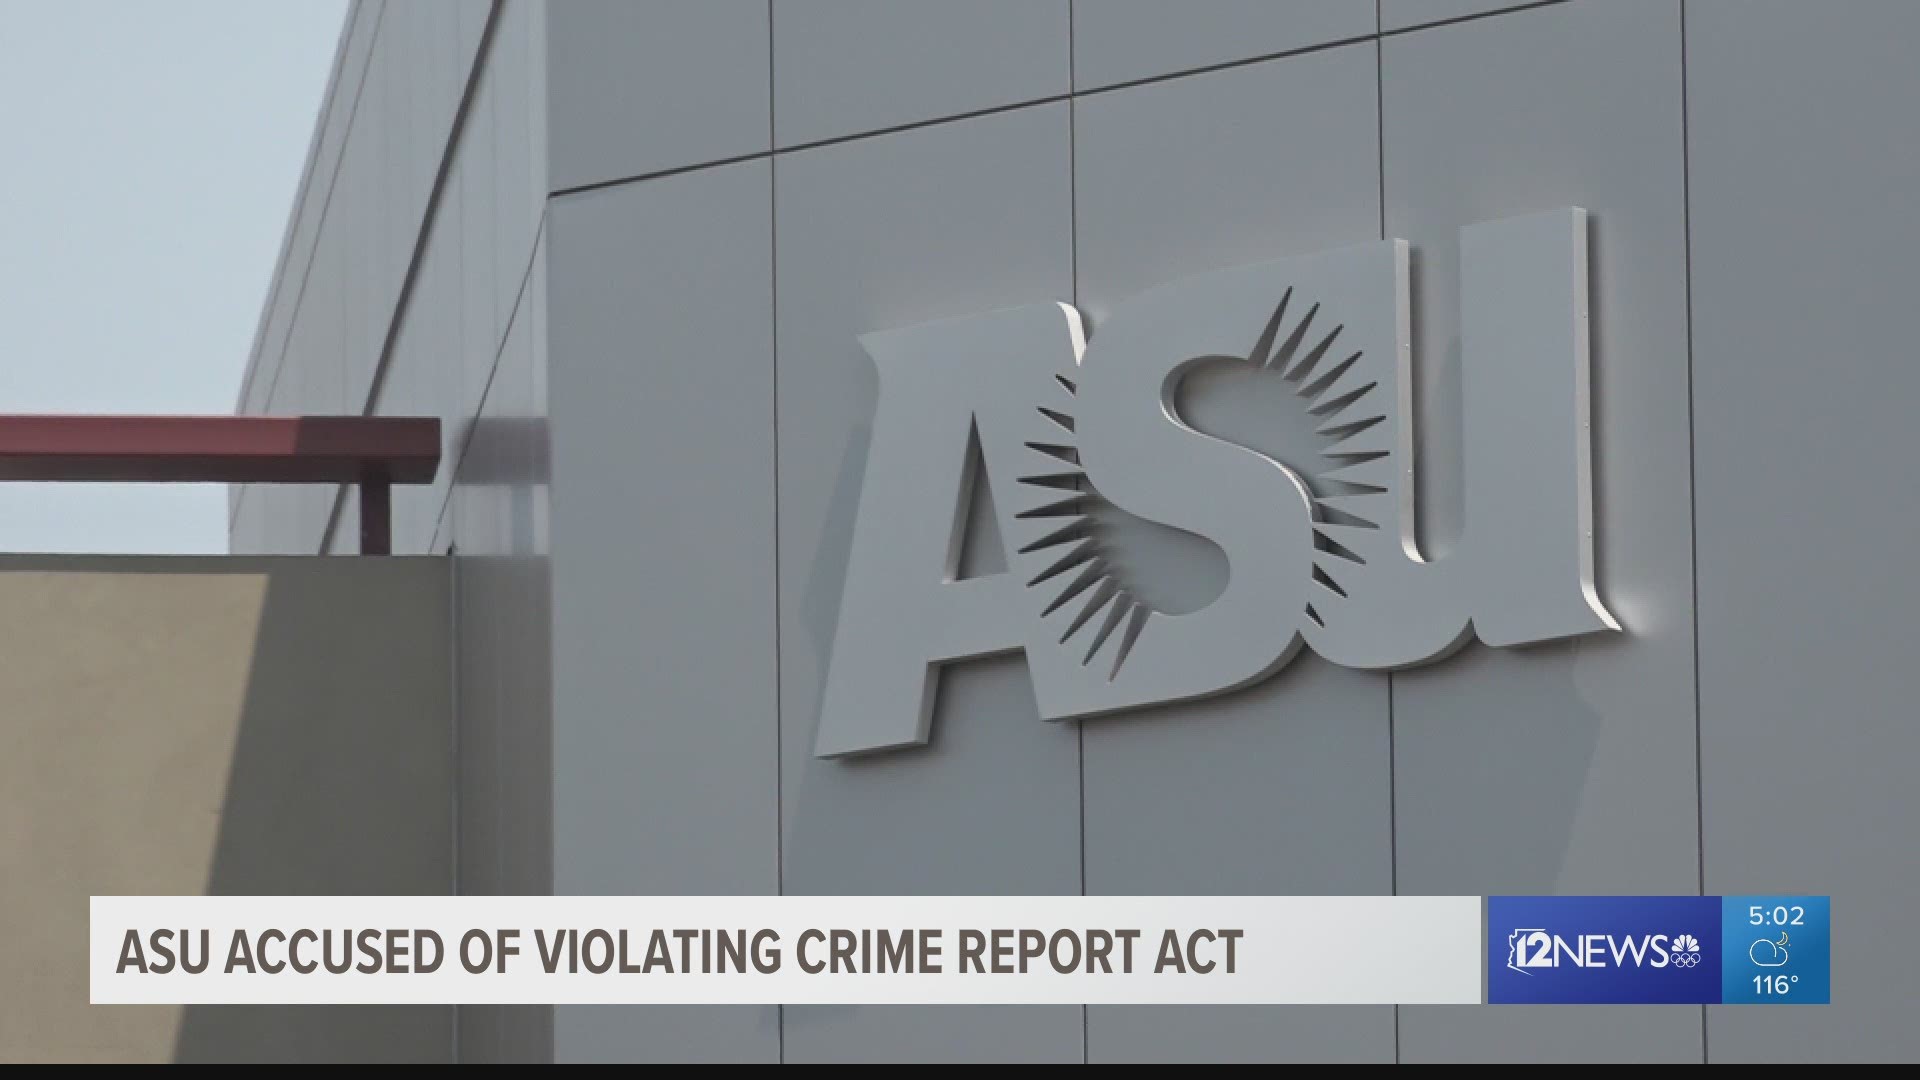 The U.S. Department of Education has found that ASU is in serious violation of the Cleary Act, federal laws requiring universities to report sexual assaults.